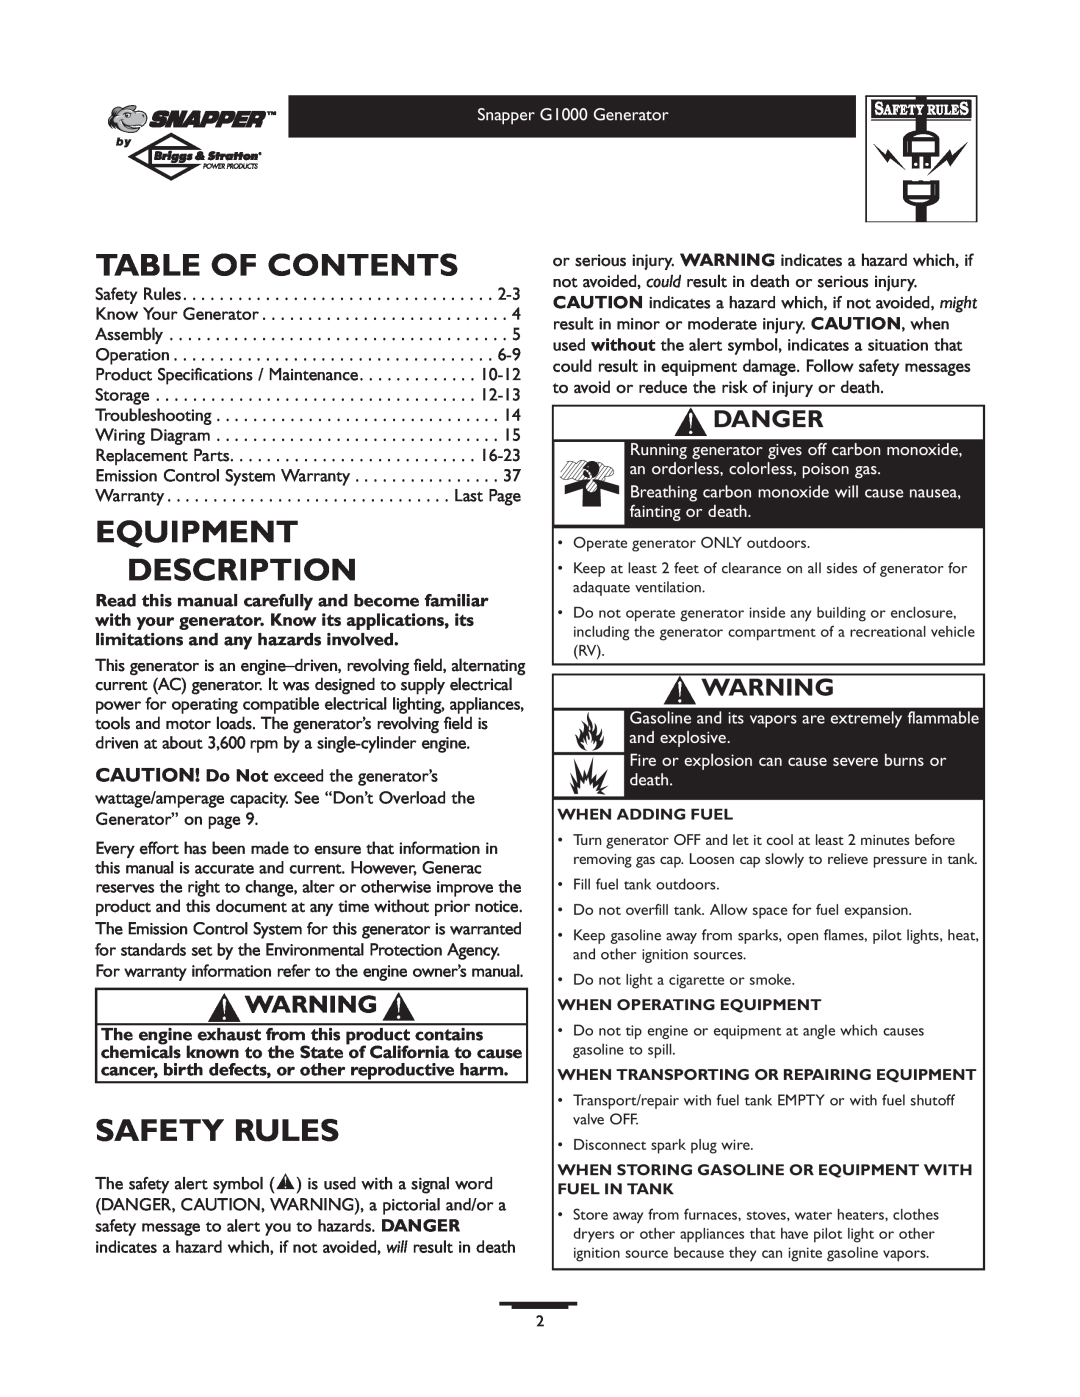 Snapper 1666-0 Table Of Contents, Equipment Description, Safety Rules, Danger, When Adding Fuel, When Operating Equipment 